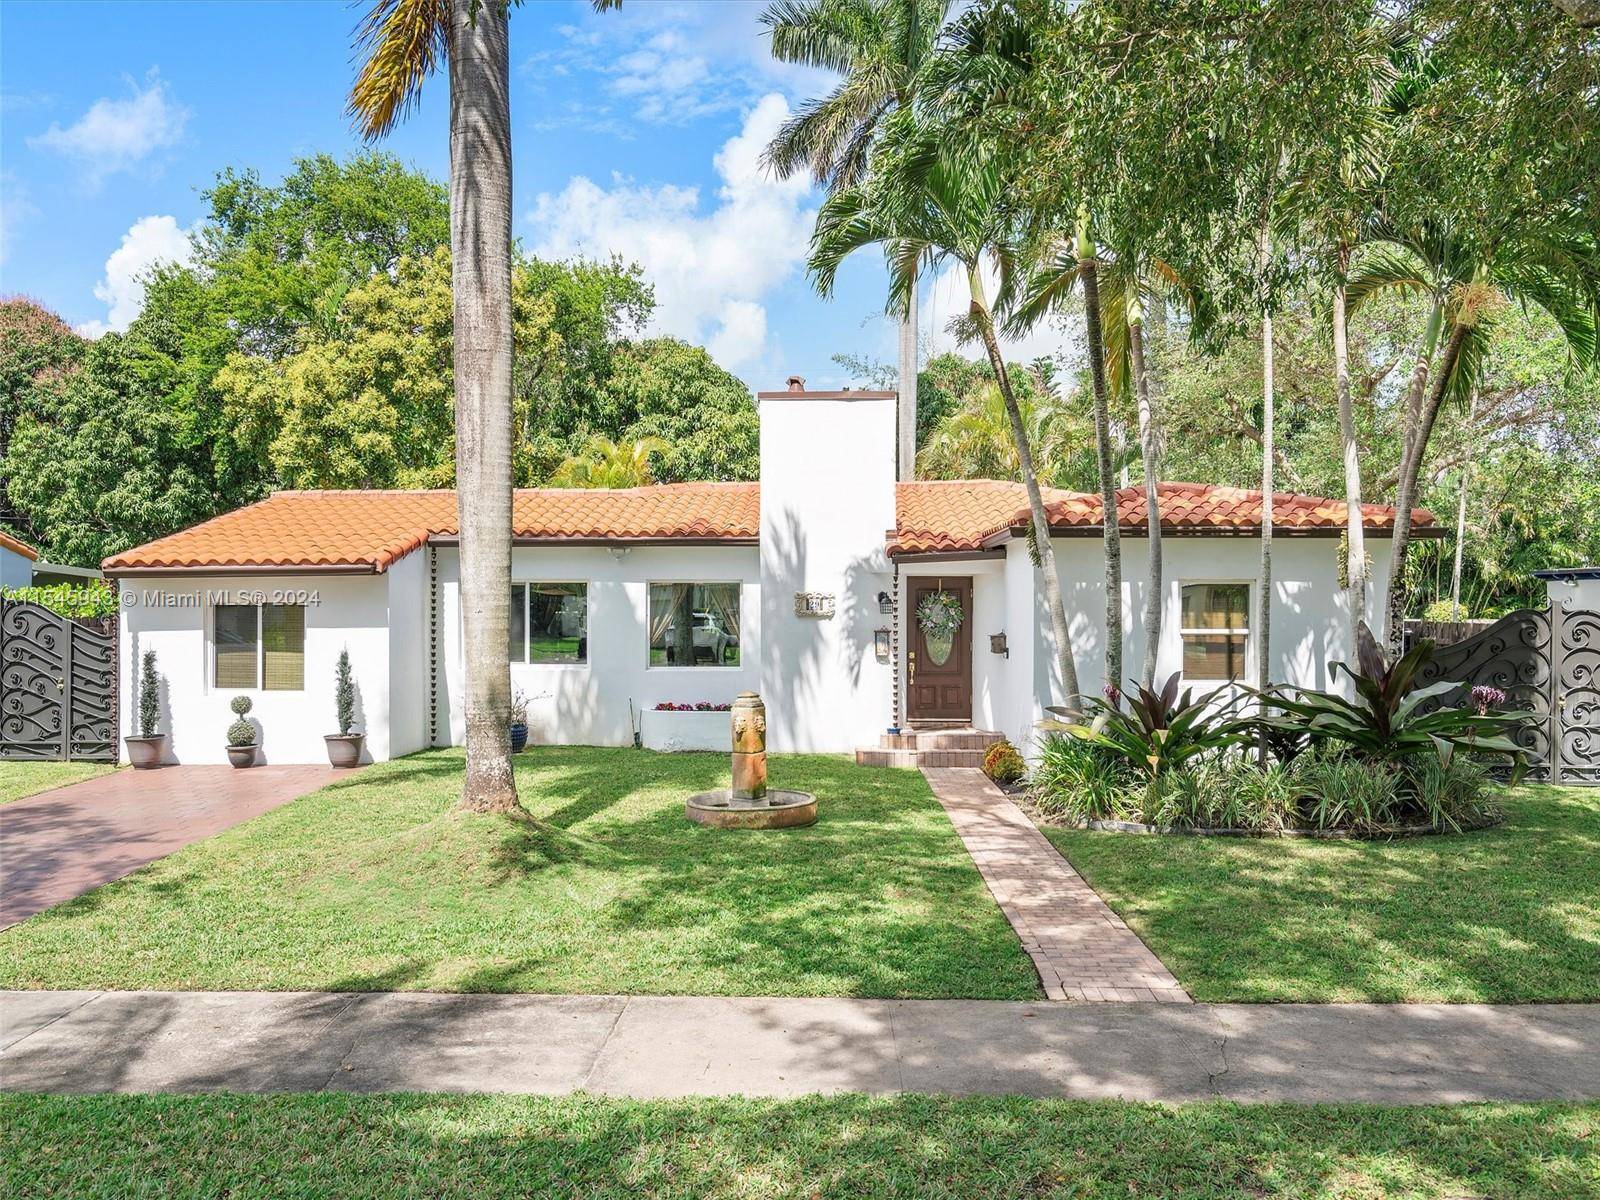 Welcome to this charming 3 bed, 2 bath home nestled in the heart of Miami Shores.